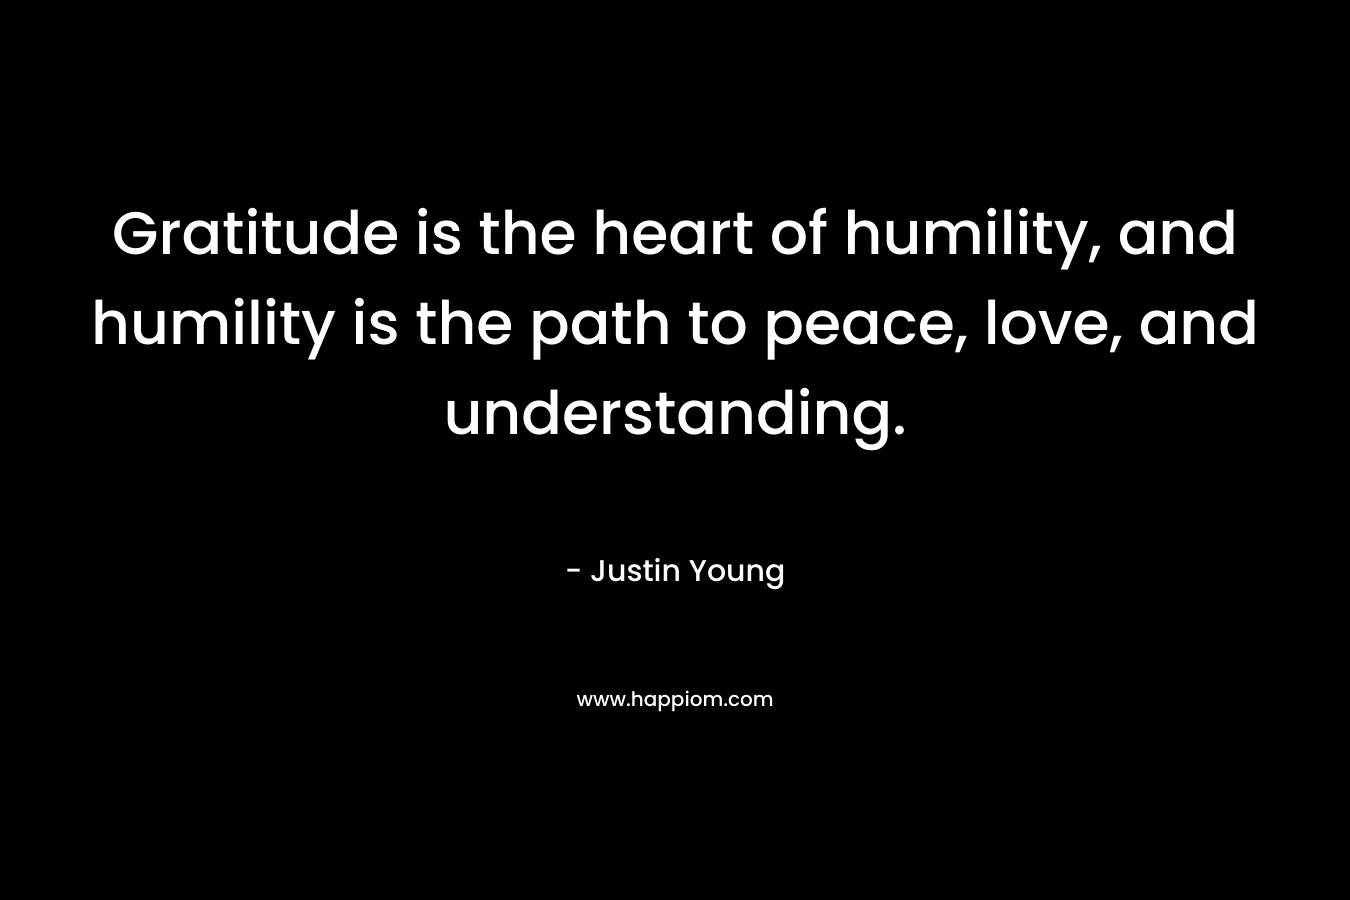 Gratitude is the heart of humility, and humility is the path to peace, love, and understanding.